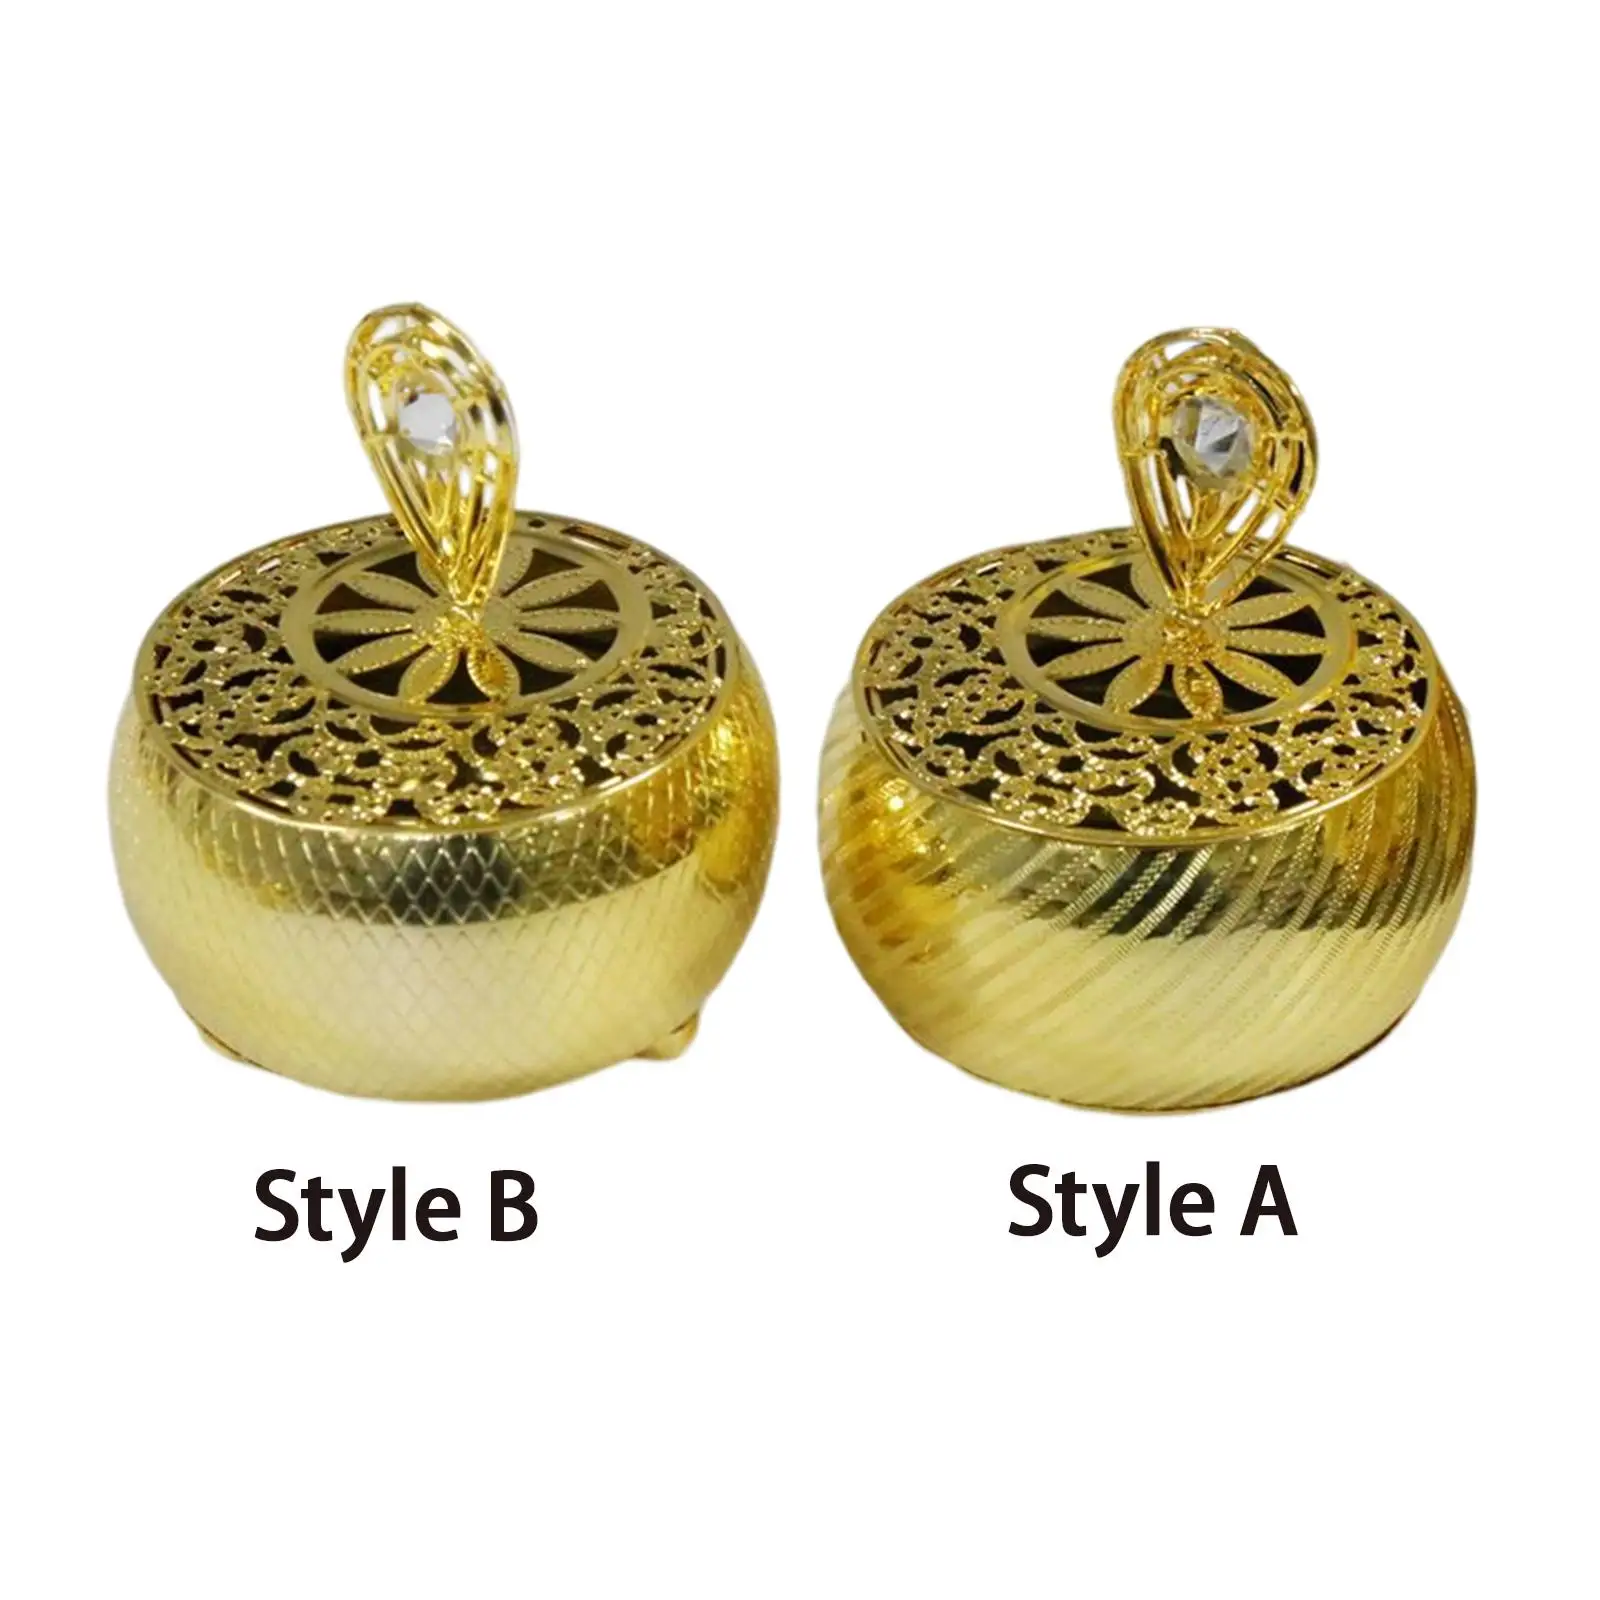 Retro Style incenses Burner incenses Cones Holder Cone Holder for Office